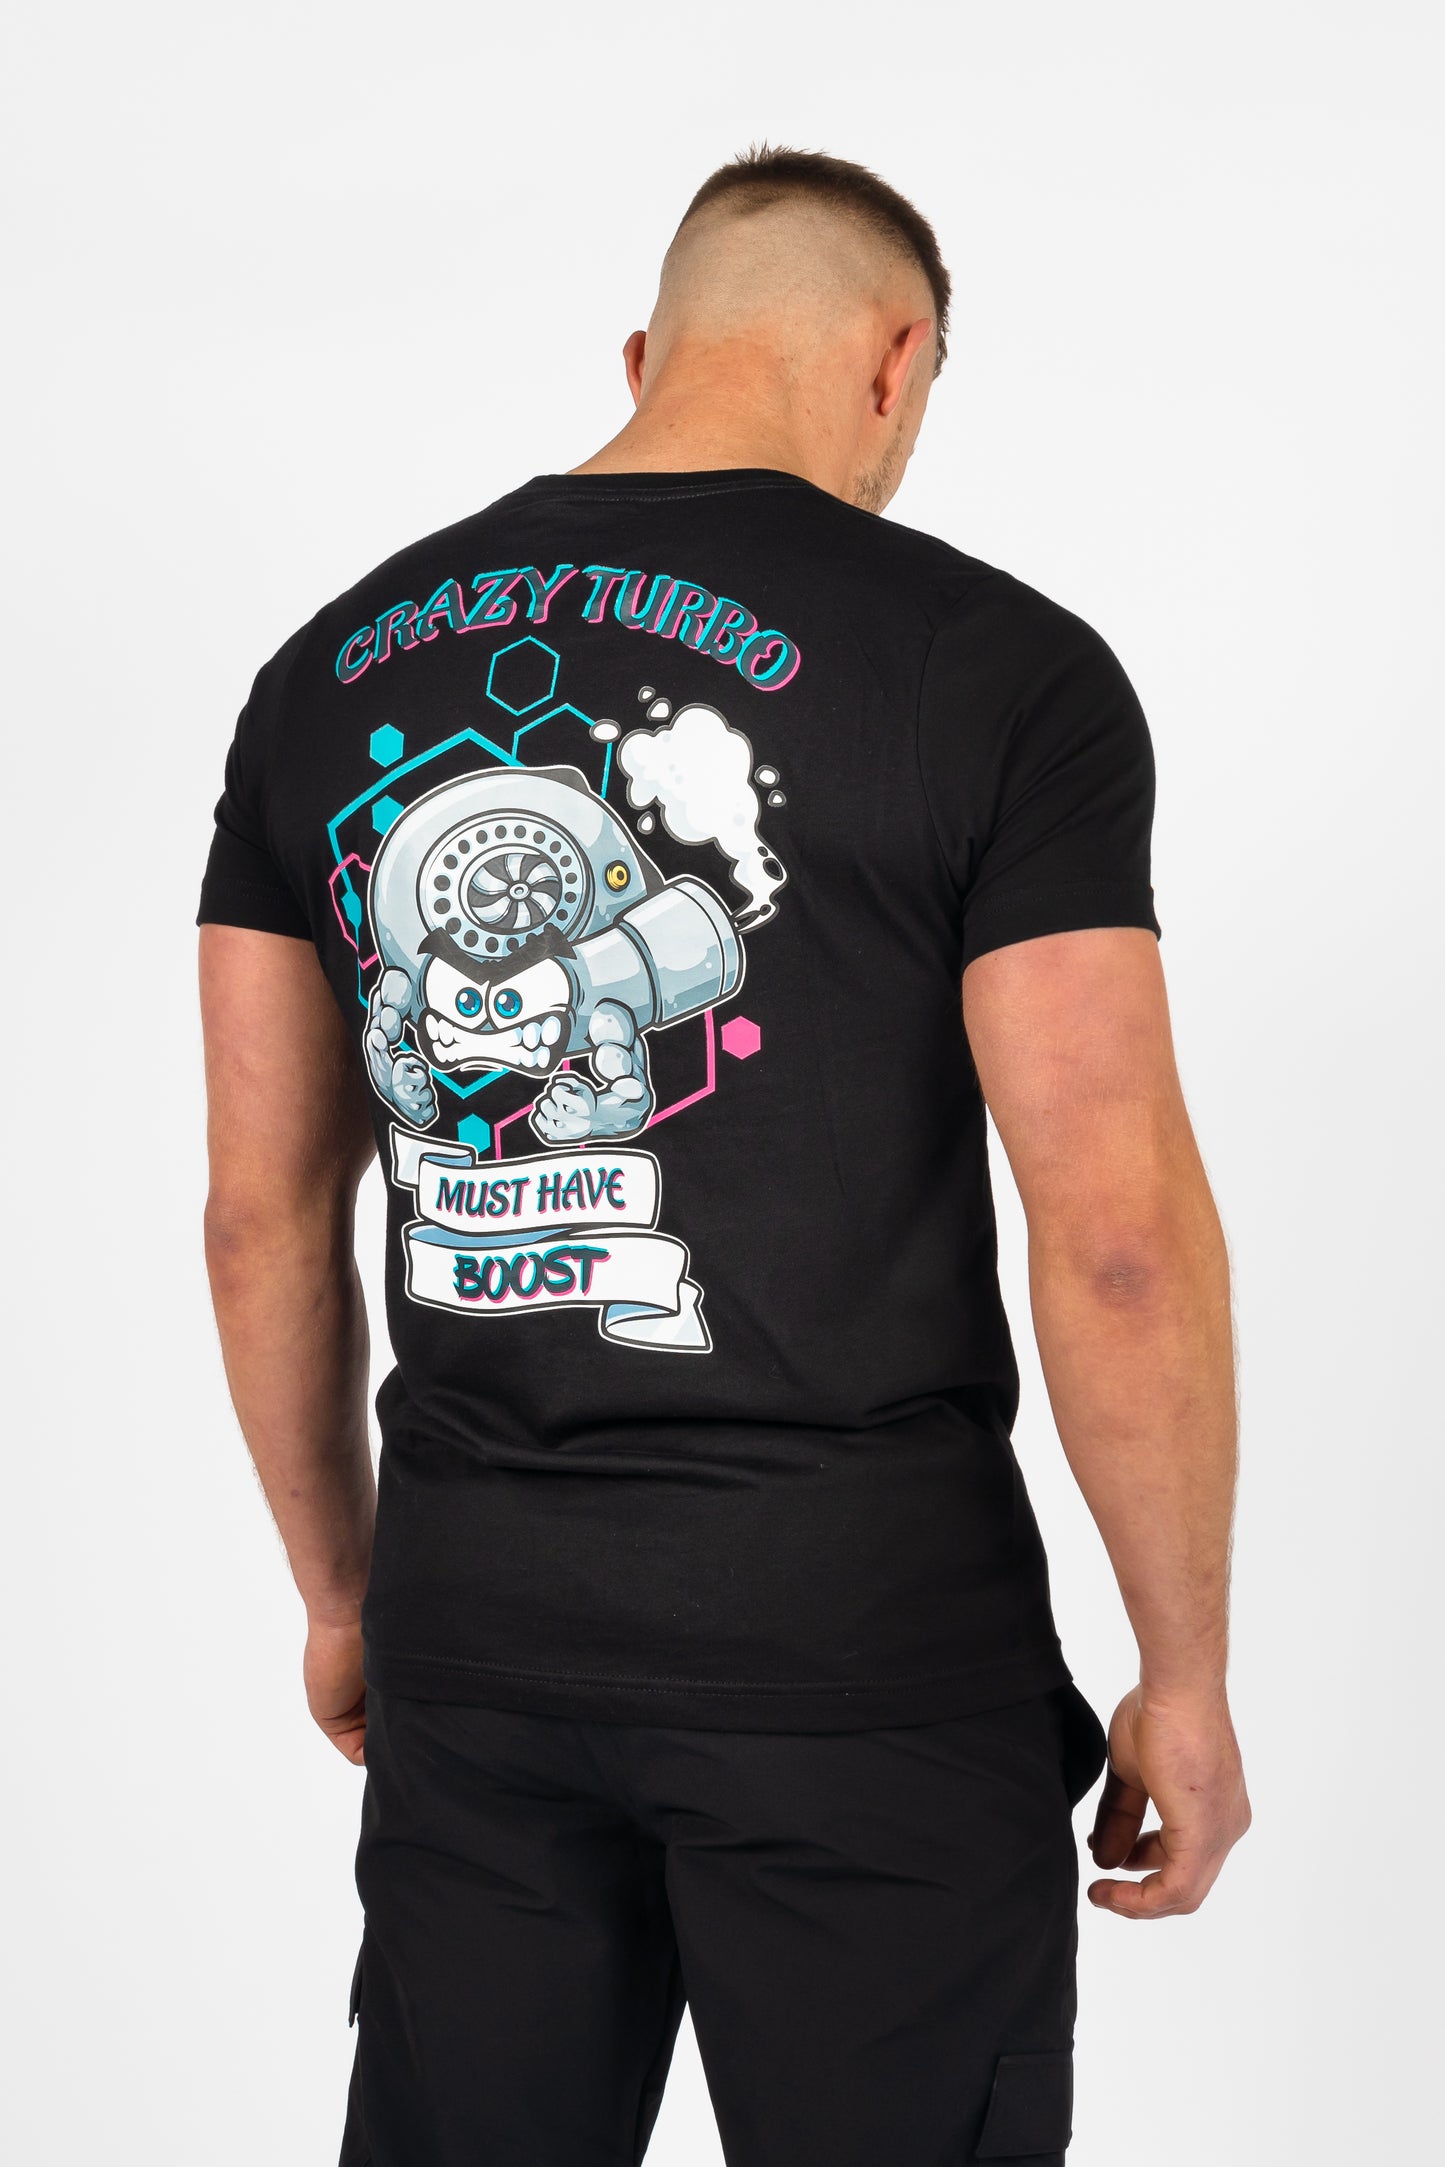 The Crazy Turbo T-Shirt (1st Edition)